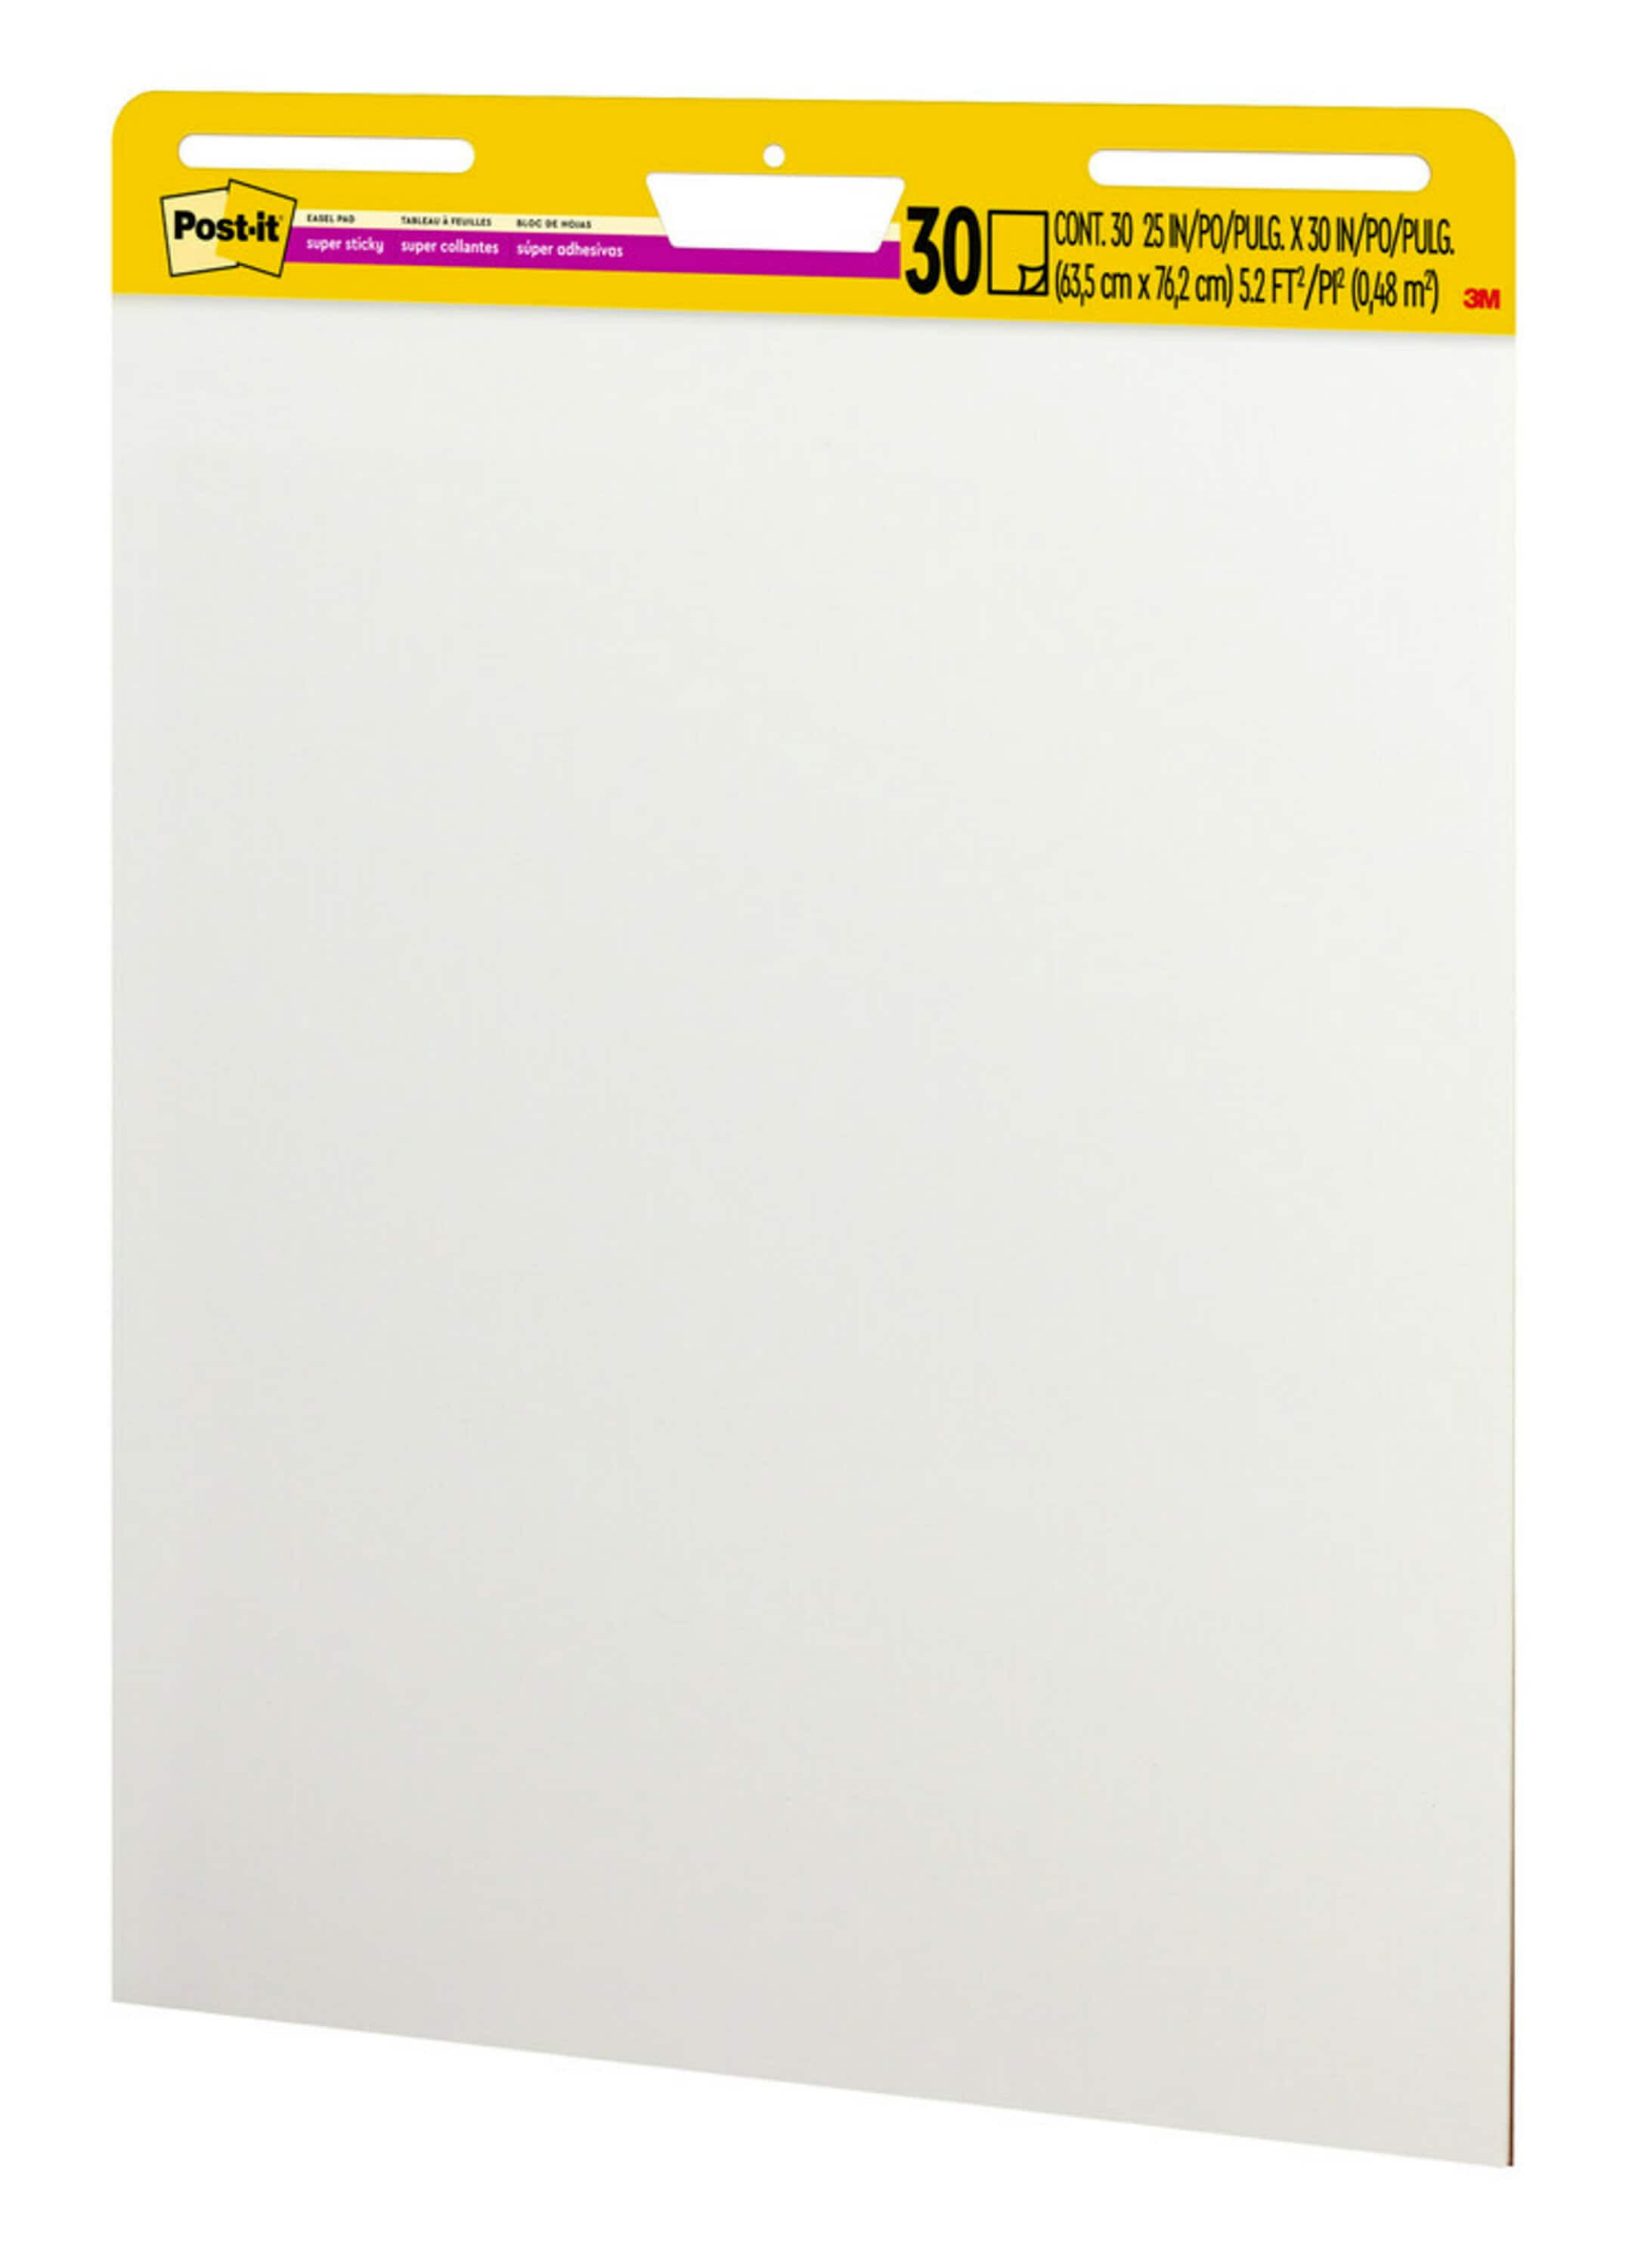 Post-it® Super Sticky Easel Pad, 25 in. x 30 in., Bright Yellow, 25  Sheets/Pad, 1 Pad/Pack